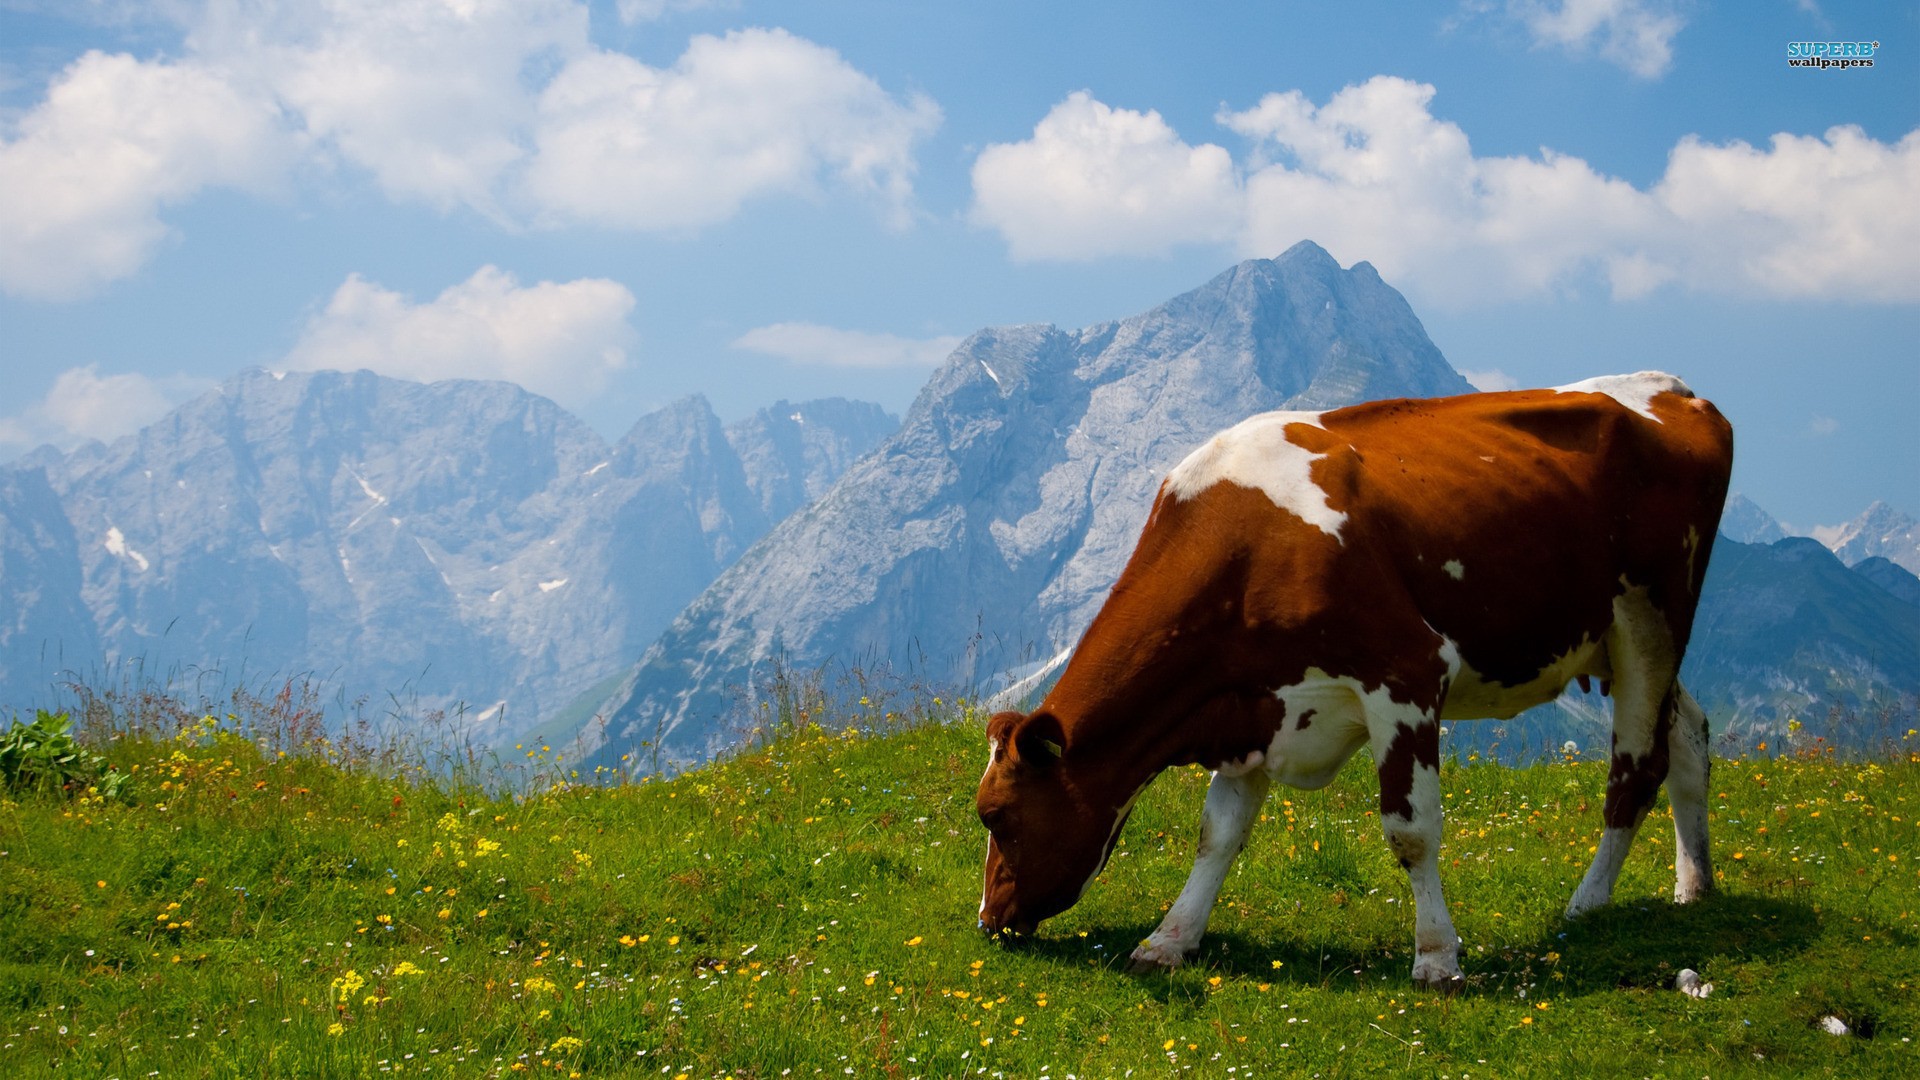 Cow In The Alpine Field Wallpaper And Image Pictures